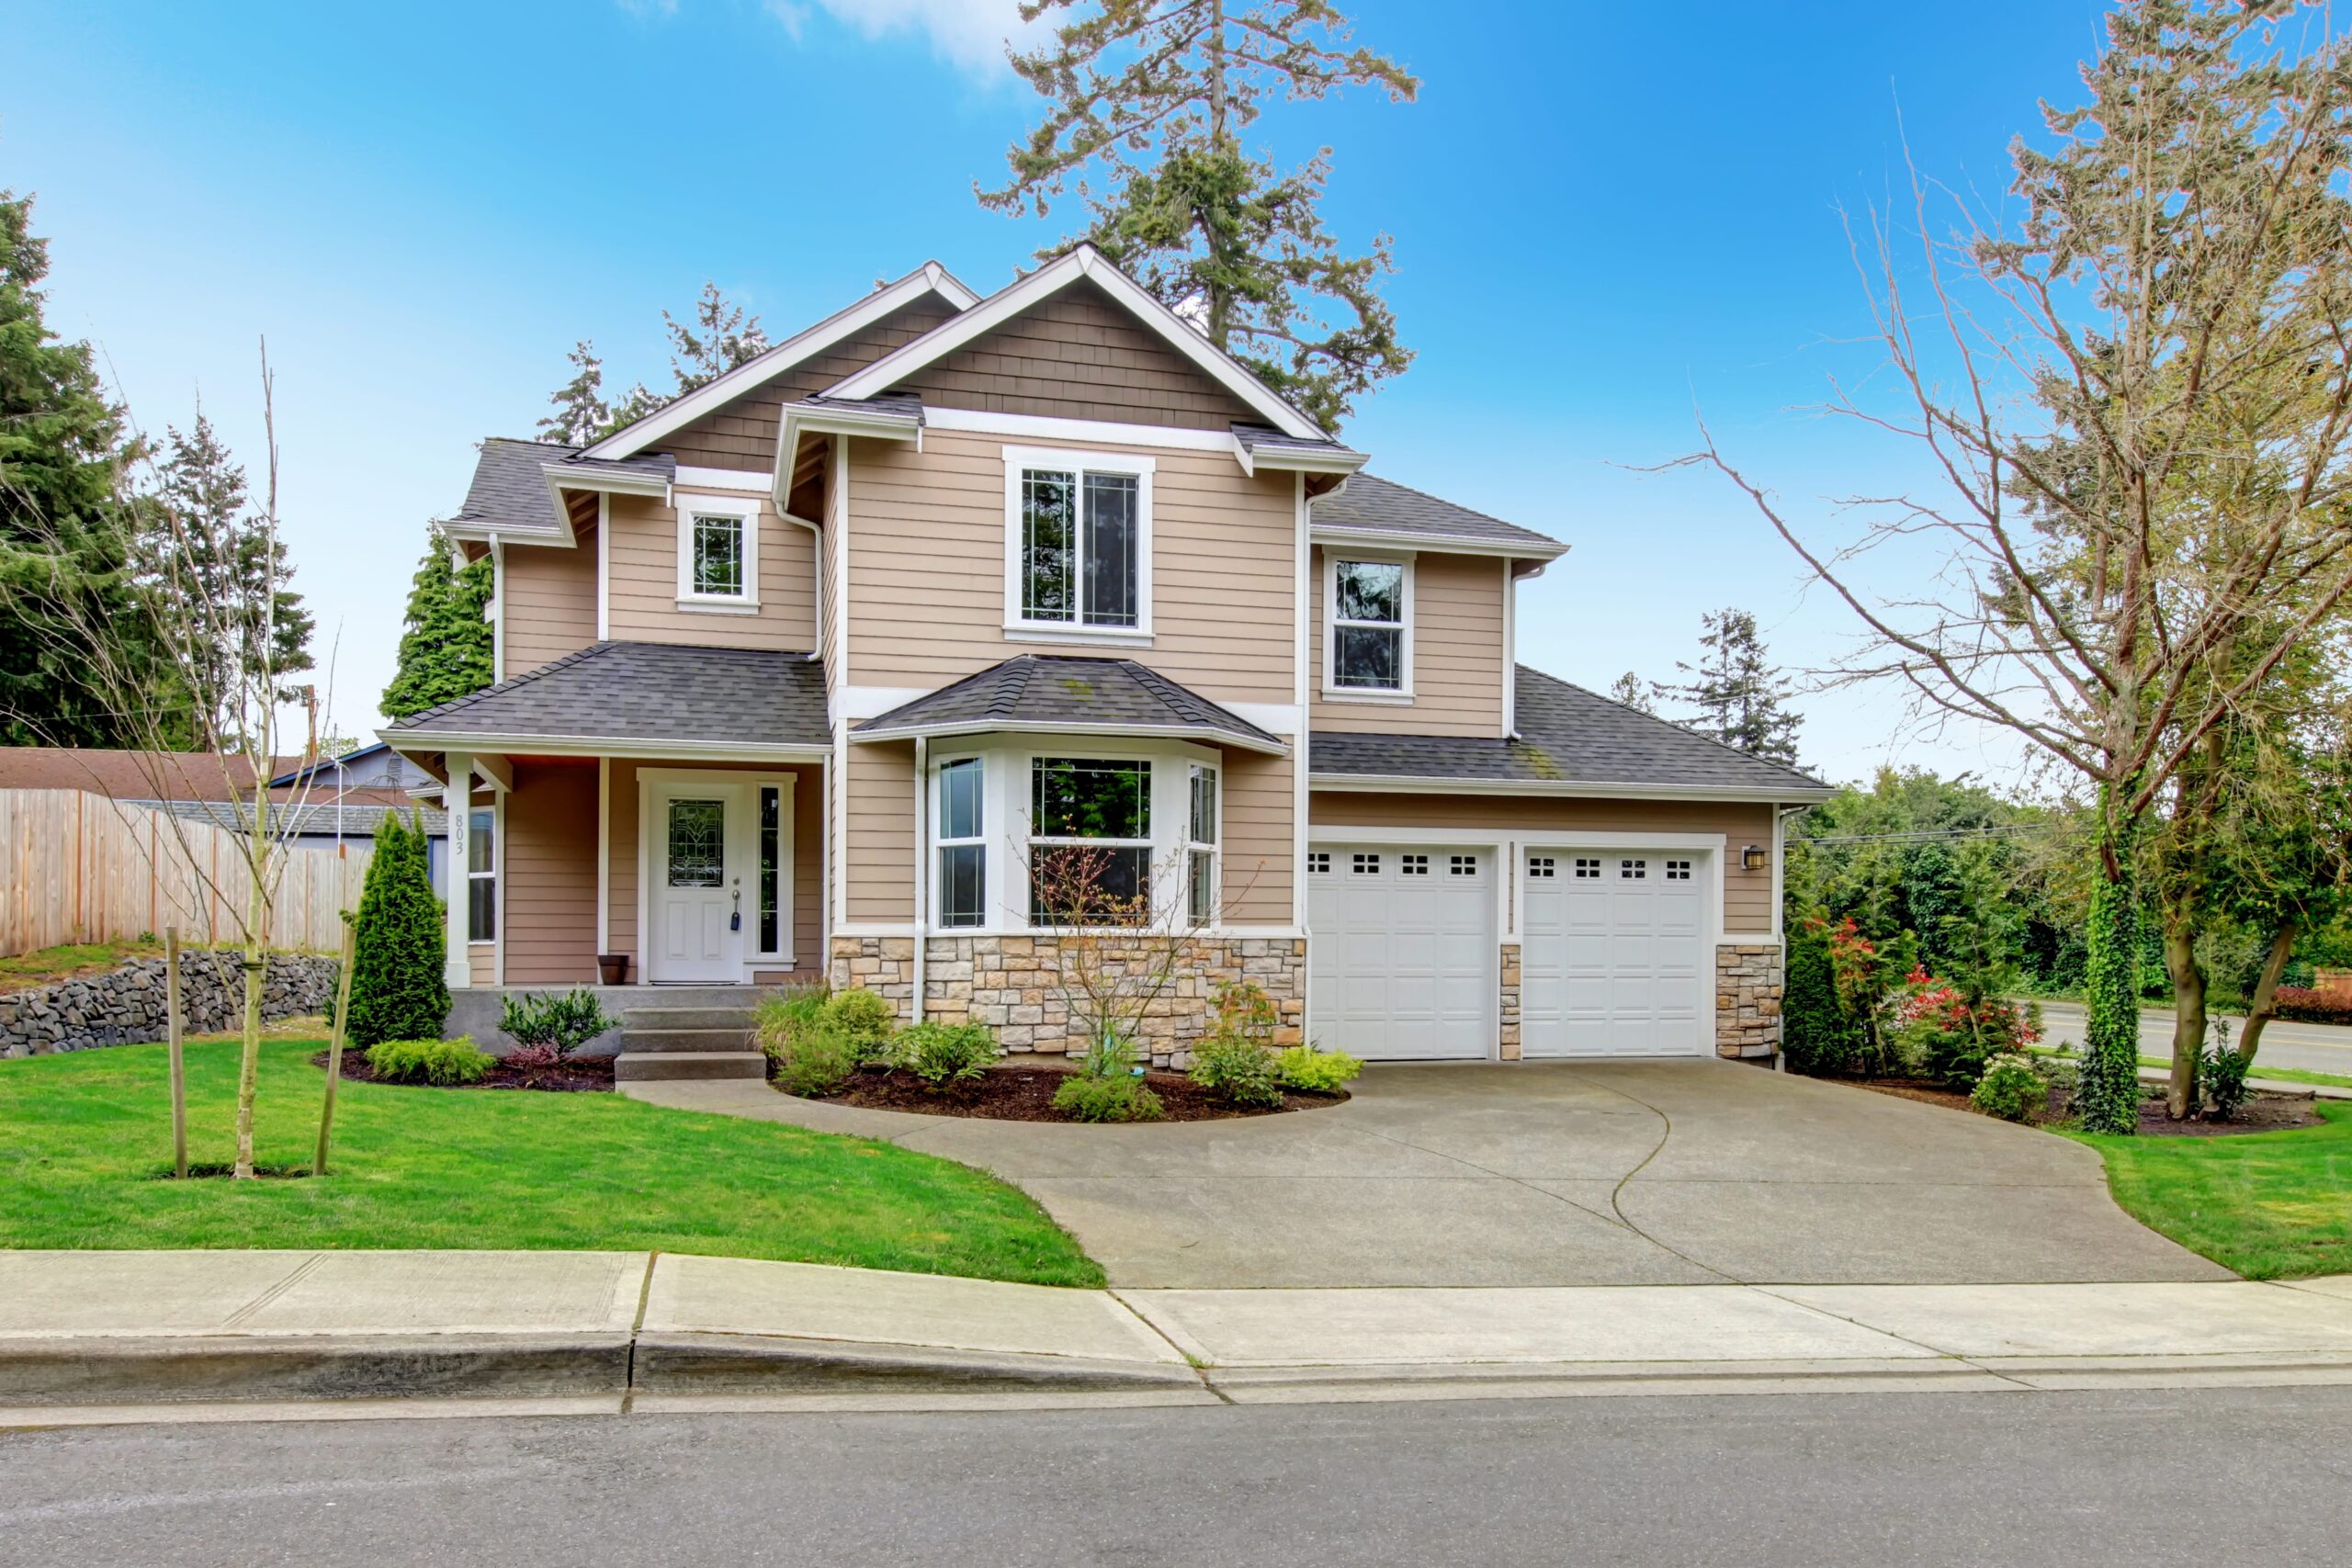 Improve Curb Appeal When Selling a House